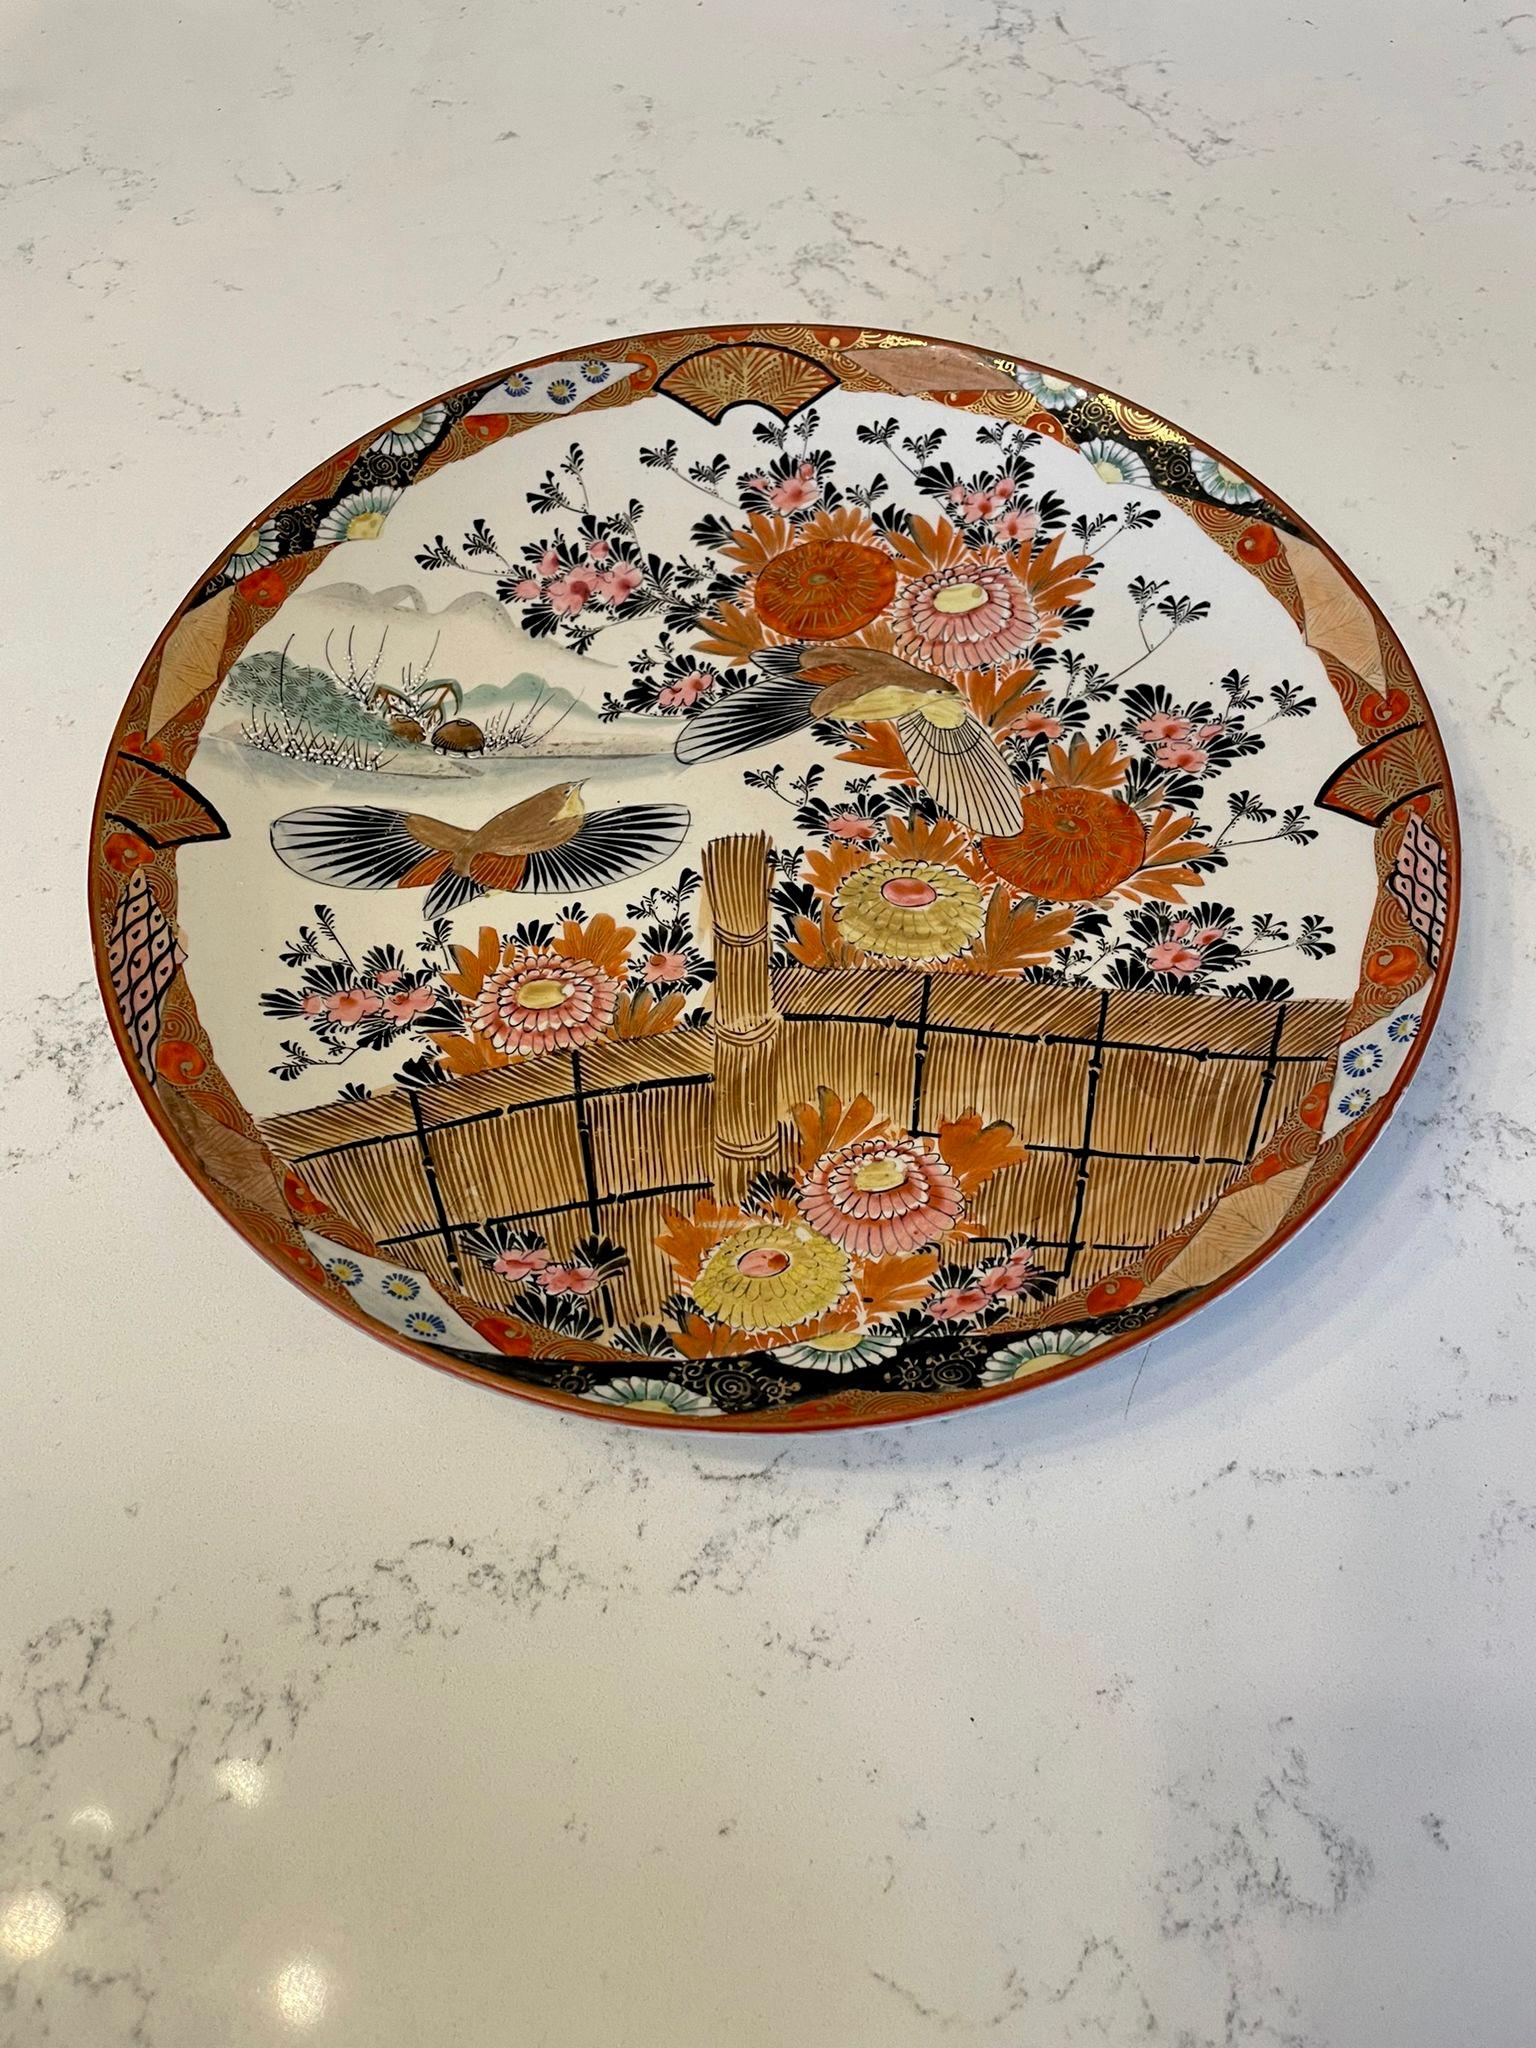 Large quality antique kutani hand painted shallow bowl signed Shozo having fantastic quality hand paintings of a garden with flying birds, flowers, leaves and a golden fence with mountains in the background. It boasts spectacular gold, red, orange,